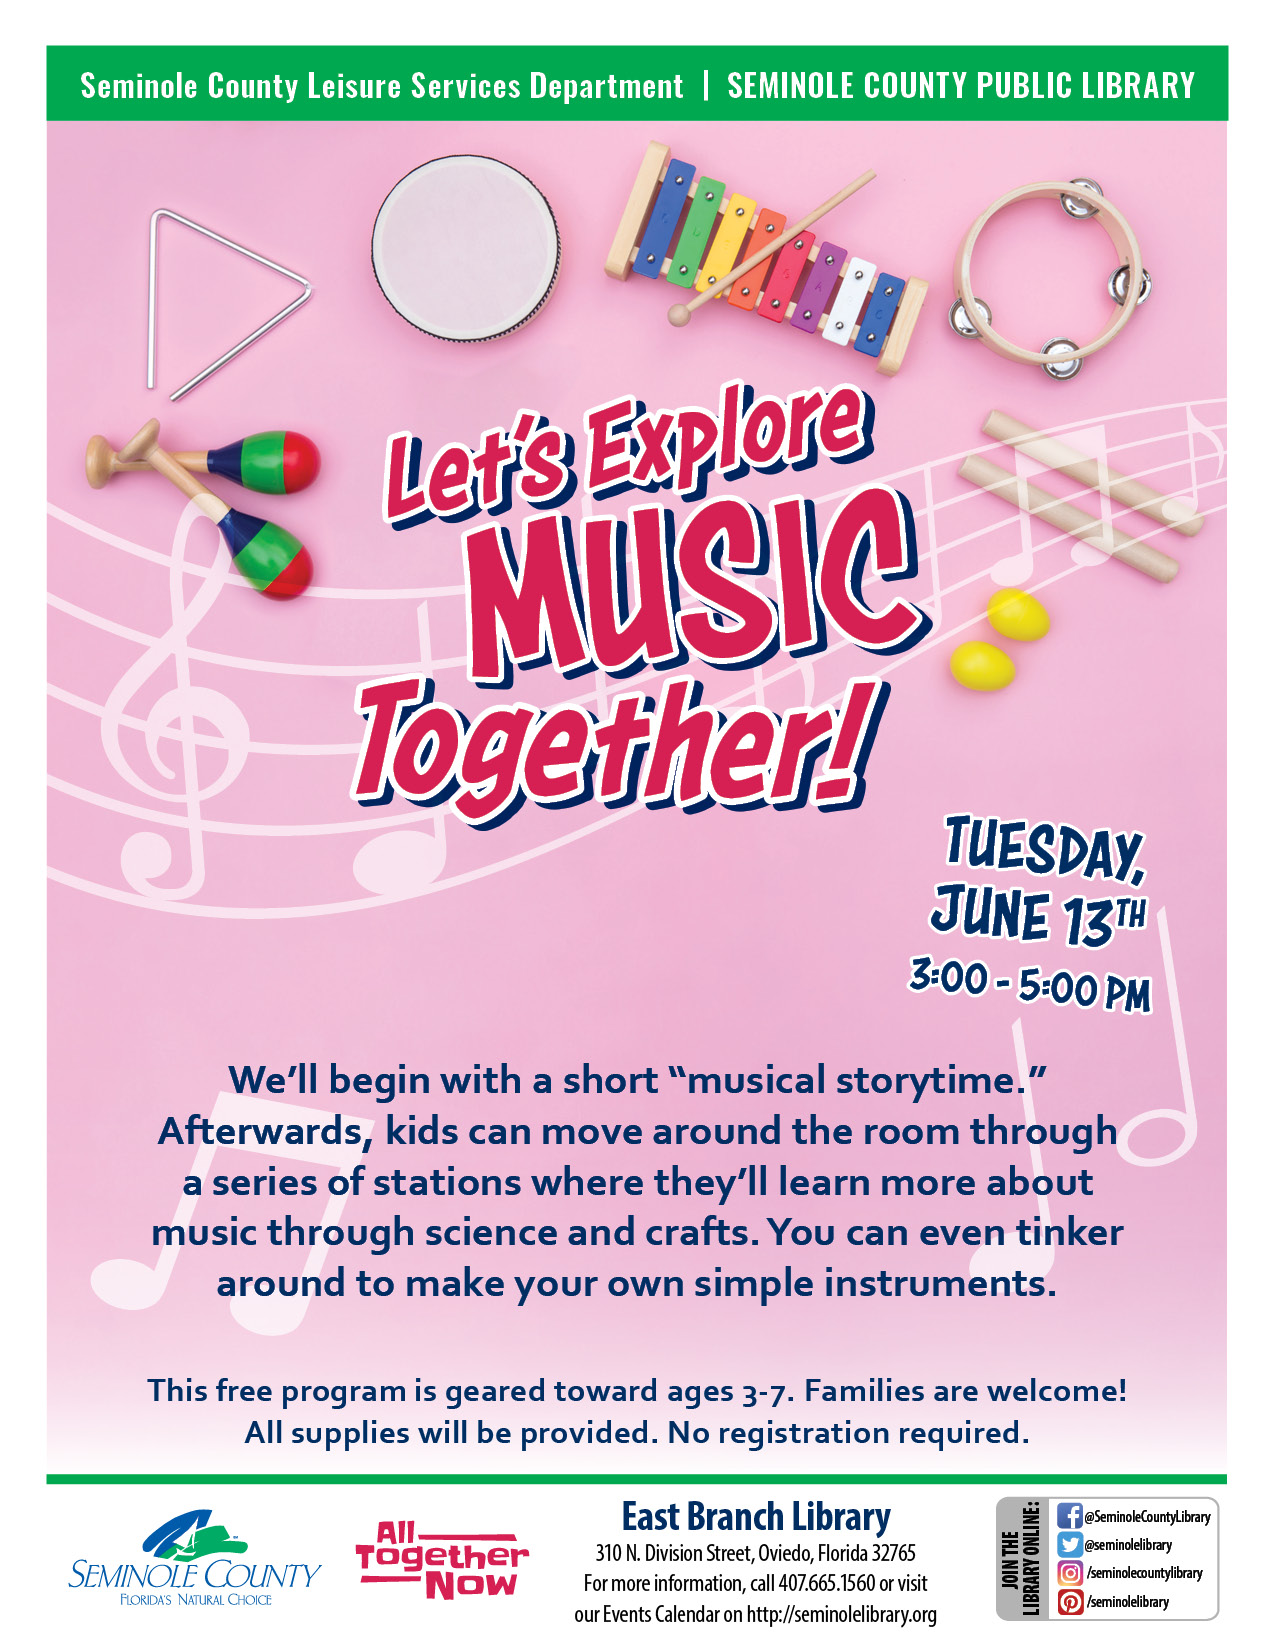 Let's Explore Music Together - East Branch Library